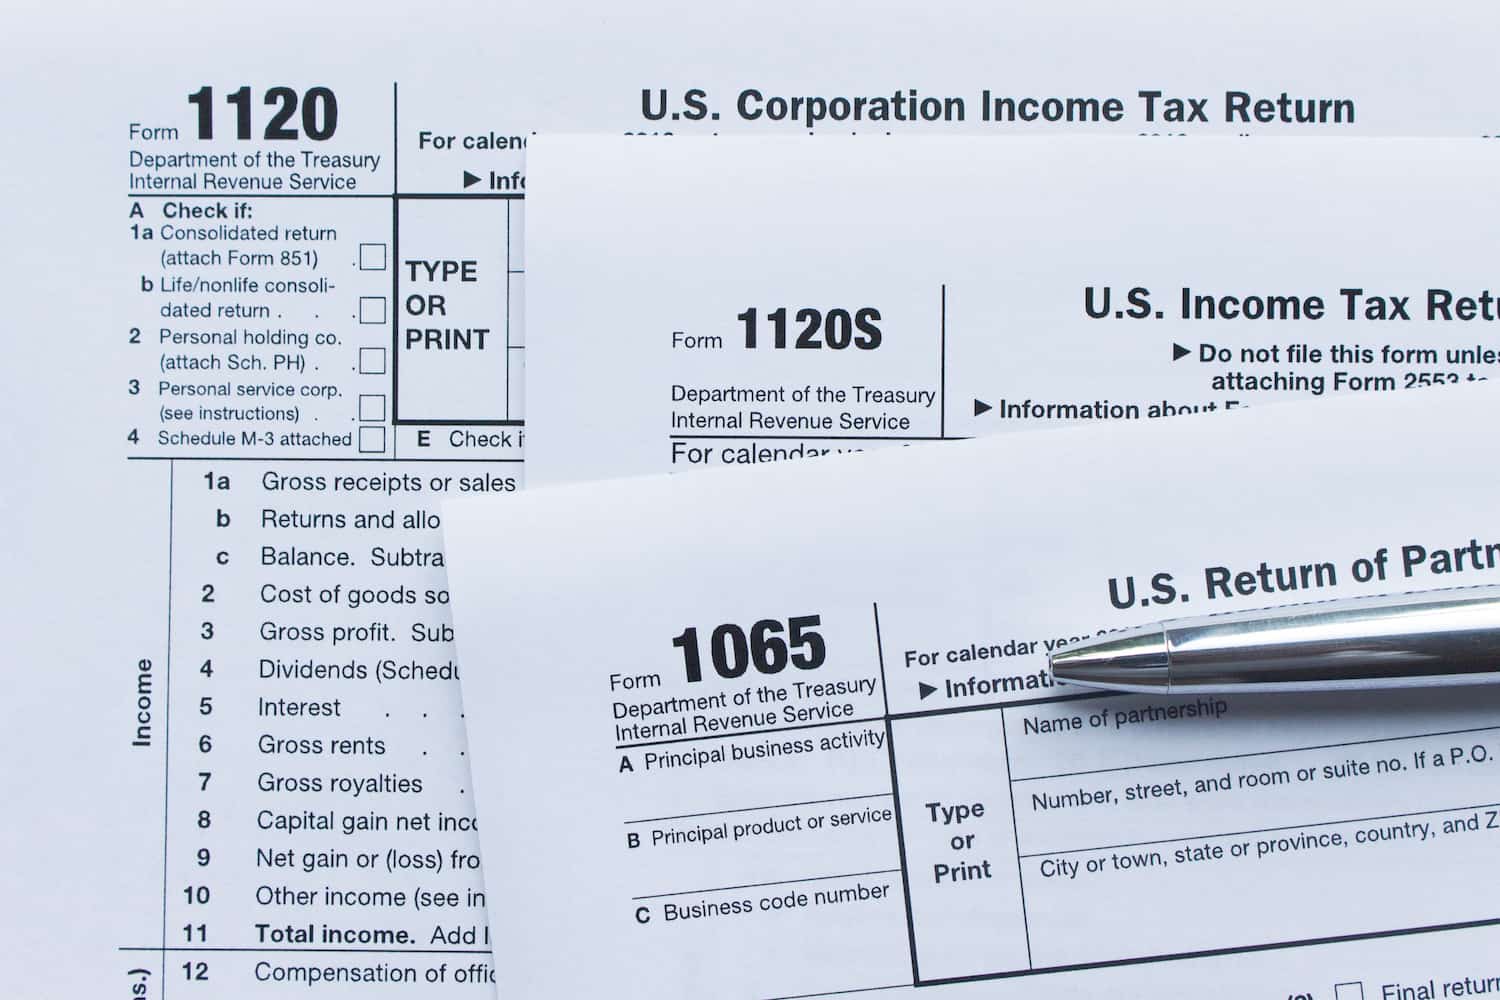 Now Is Your Last Chance To Save On Your 2021 Taxes